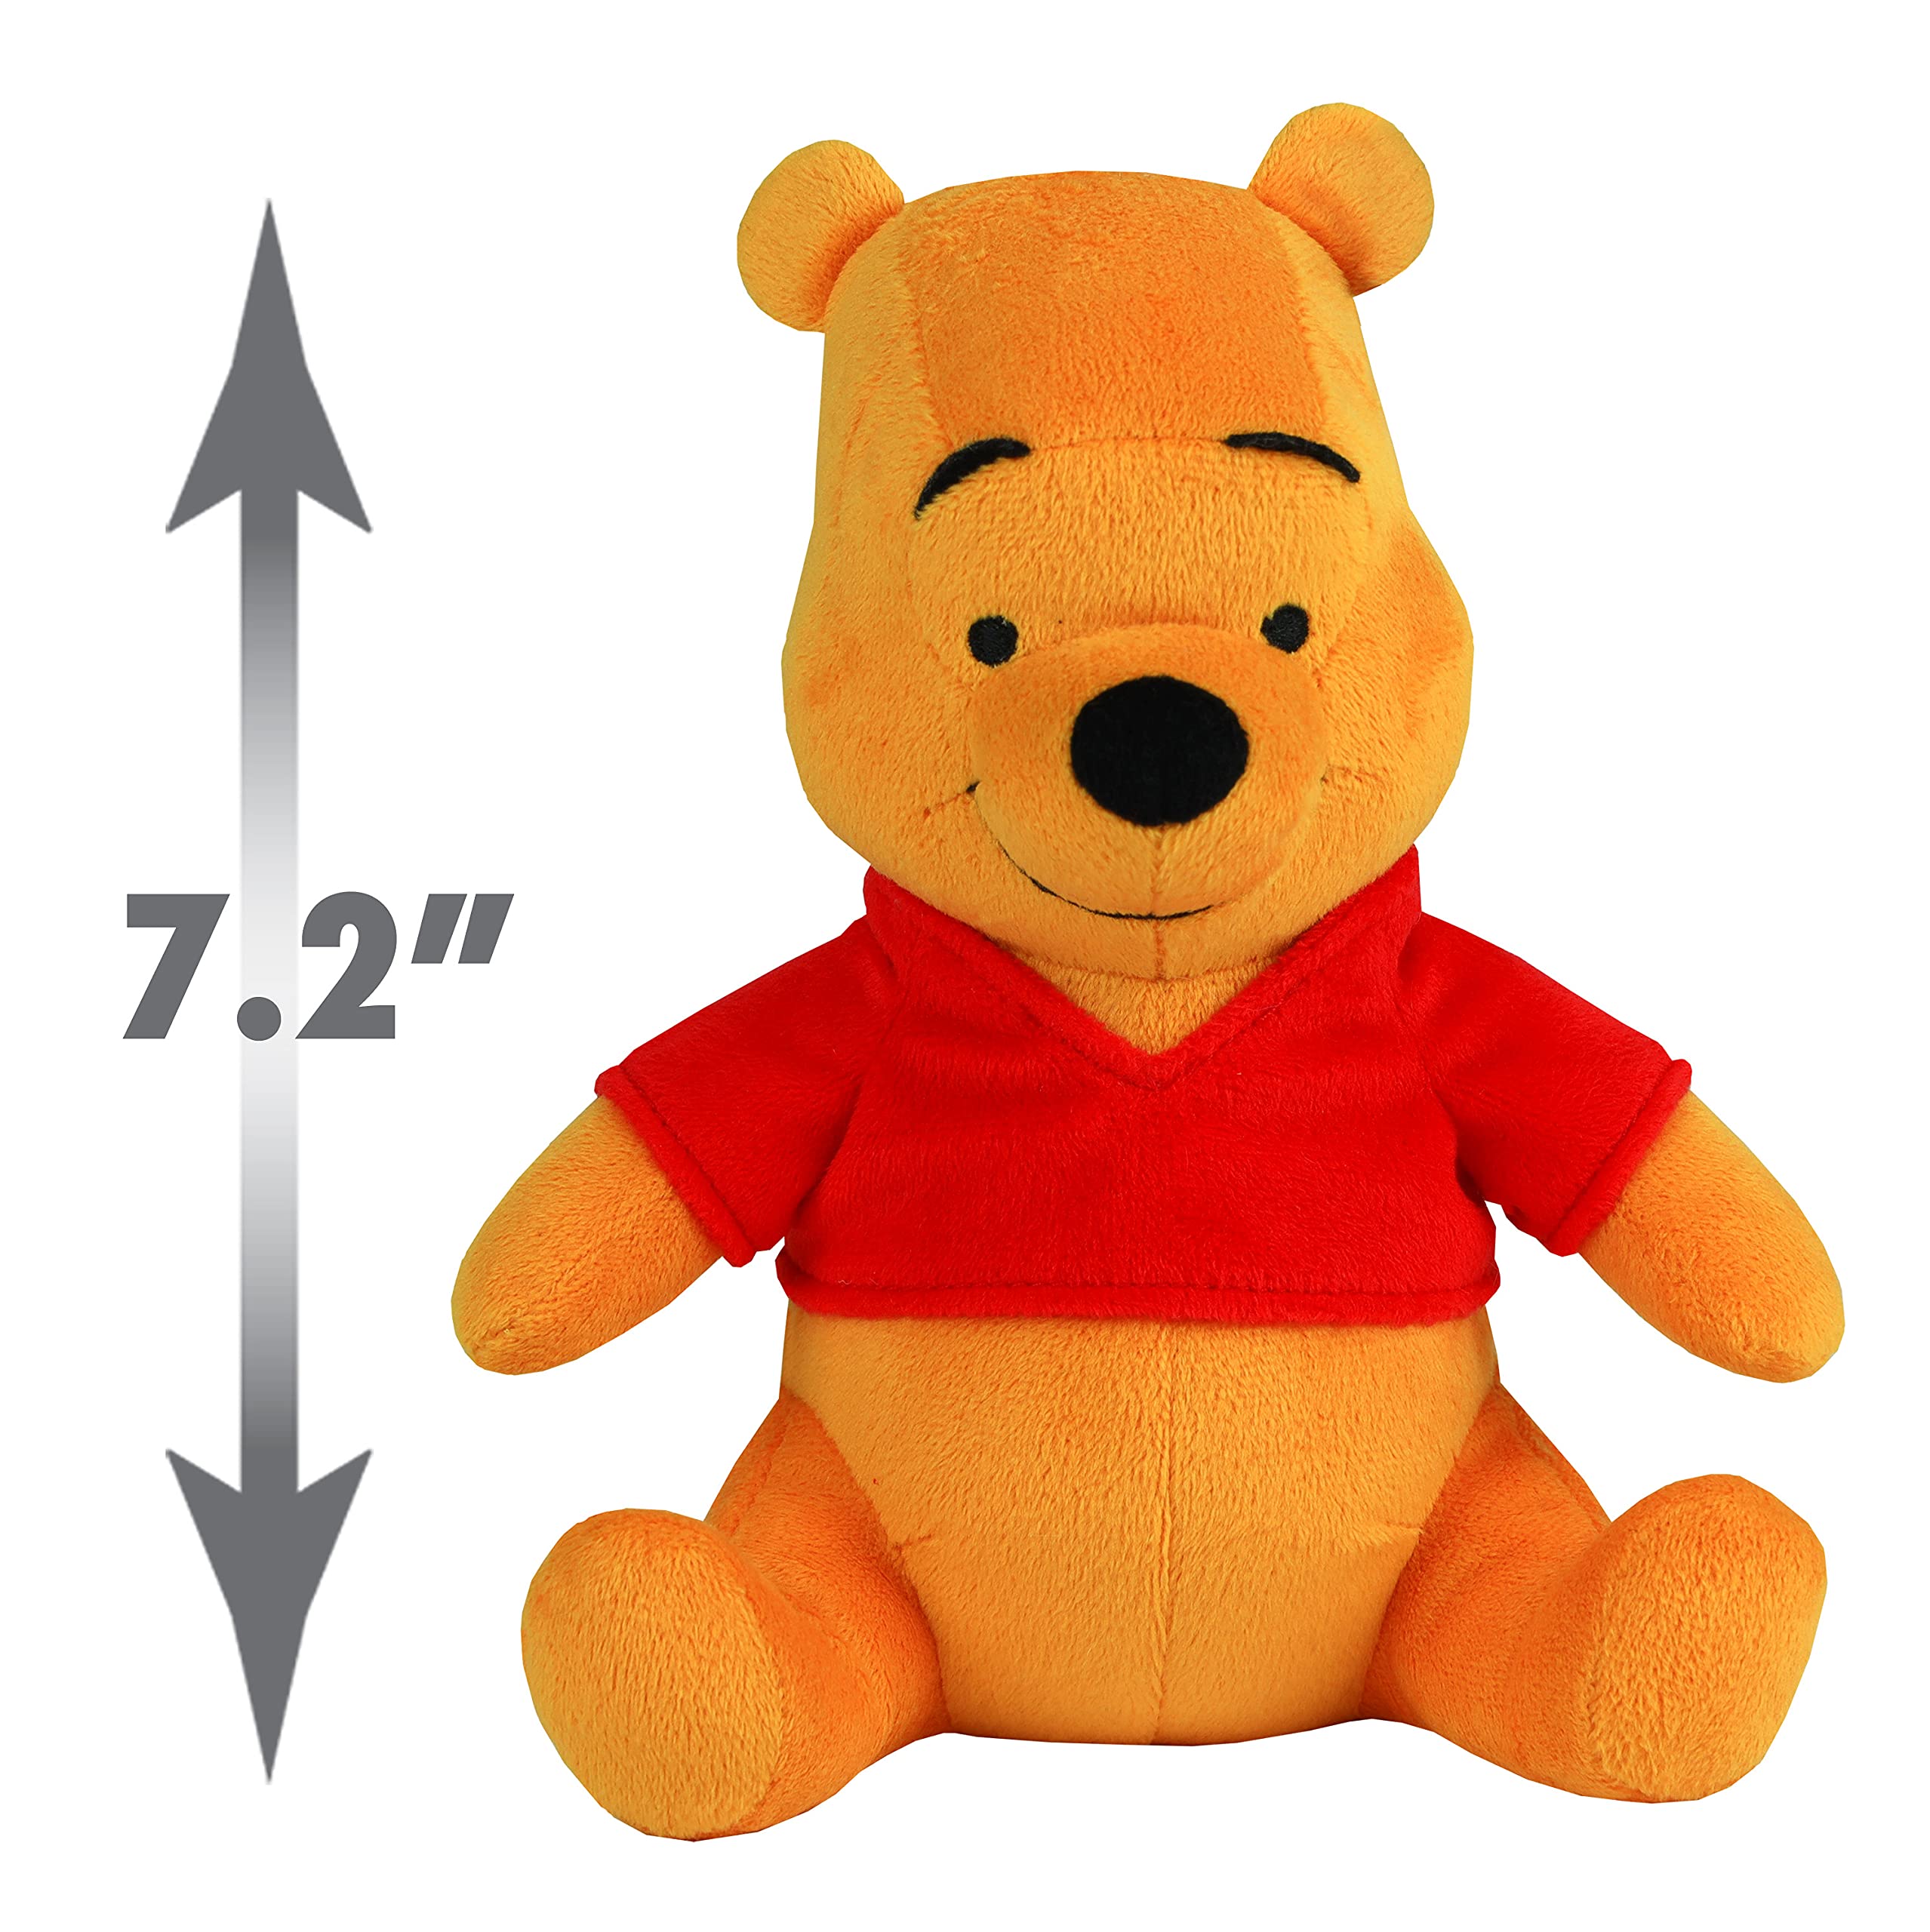 Disney Collectible Beanbag Plush, Winnie the Pooh, Officially Licensed Kids Toys for Ages 2 Up, Gifts and Presents by Just Play